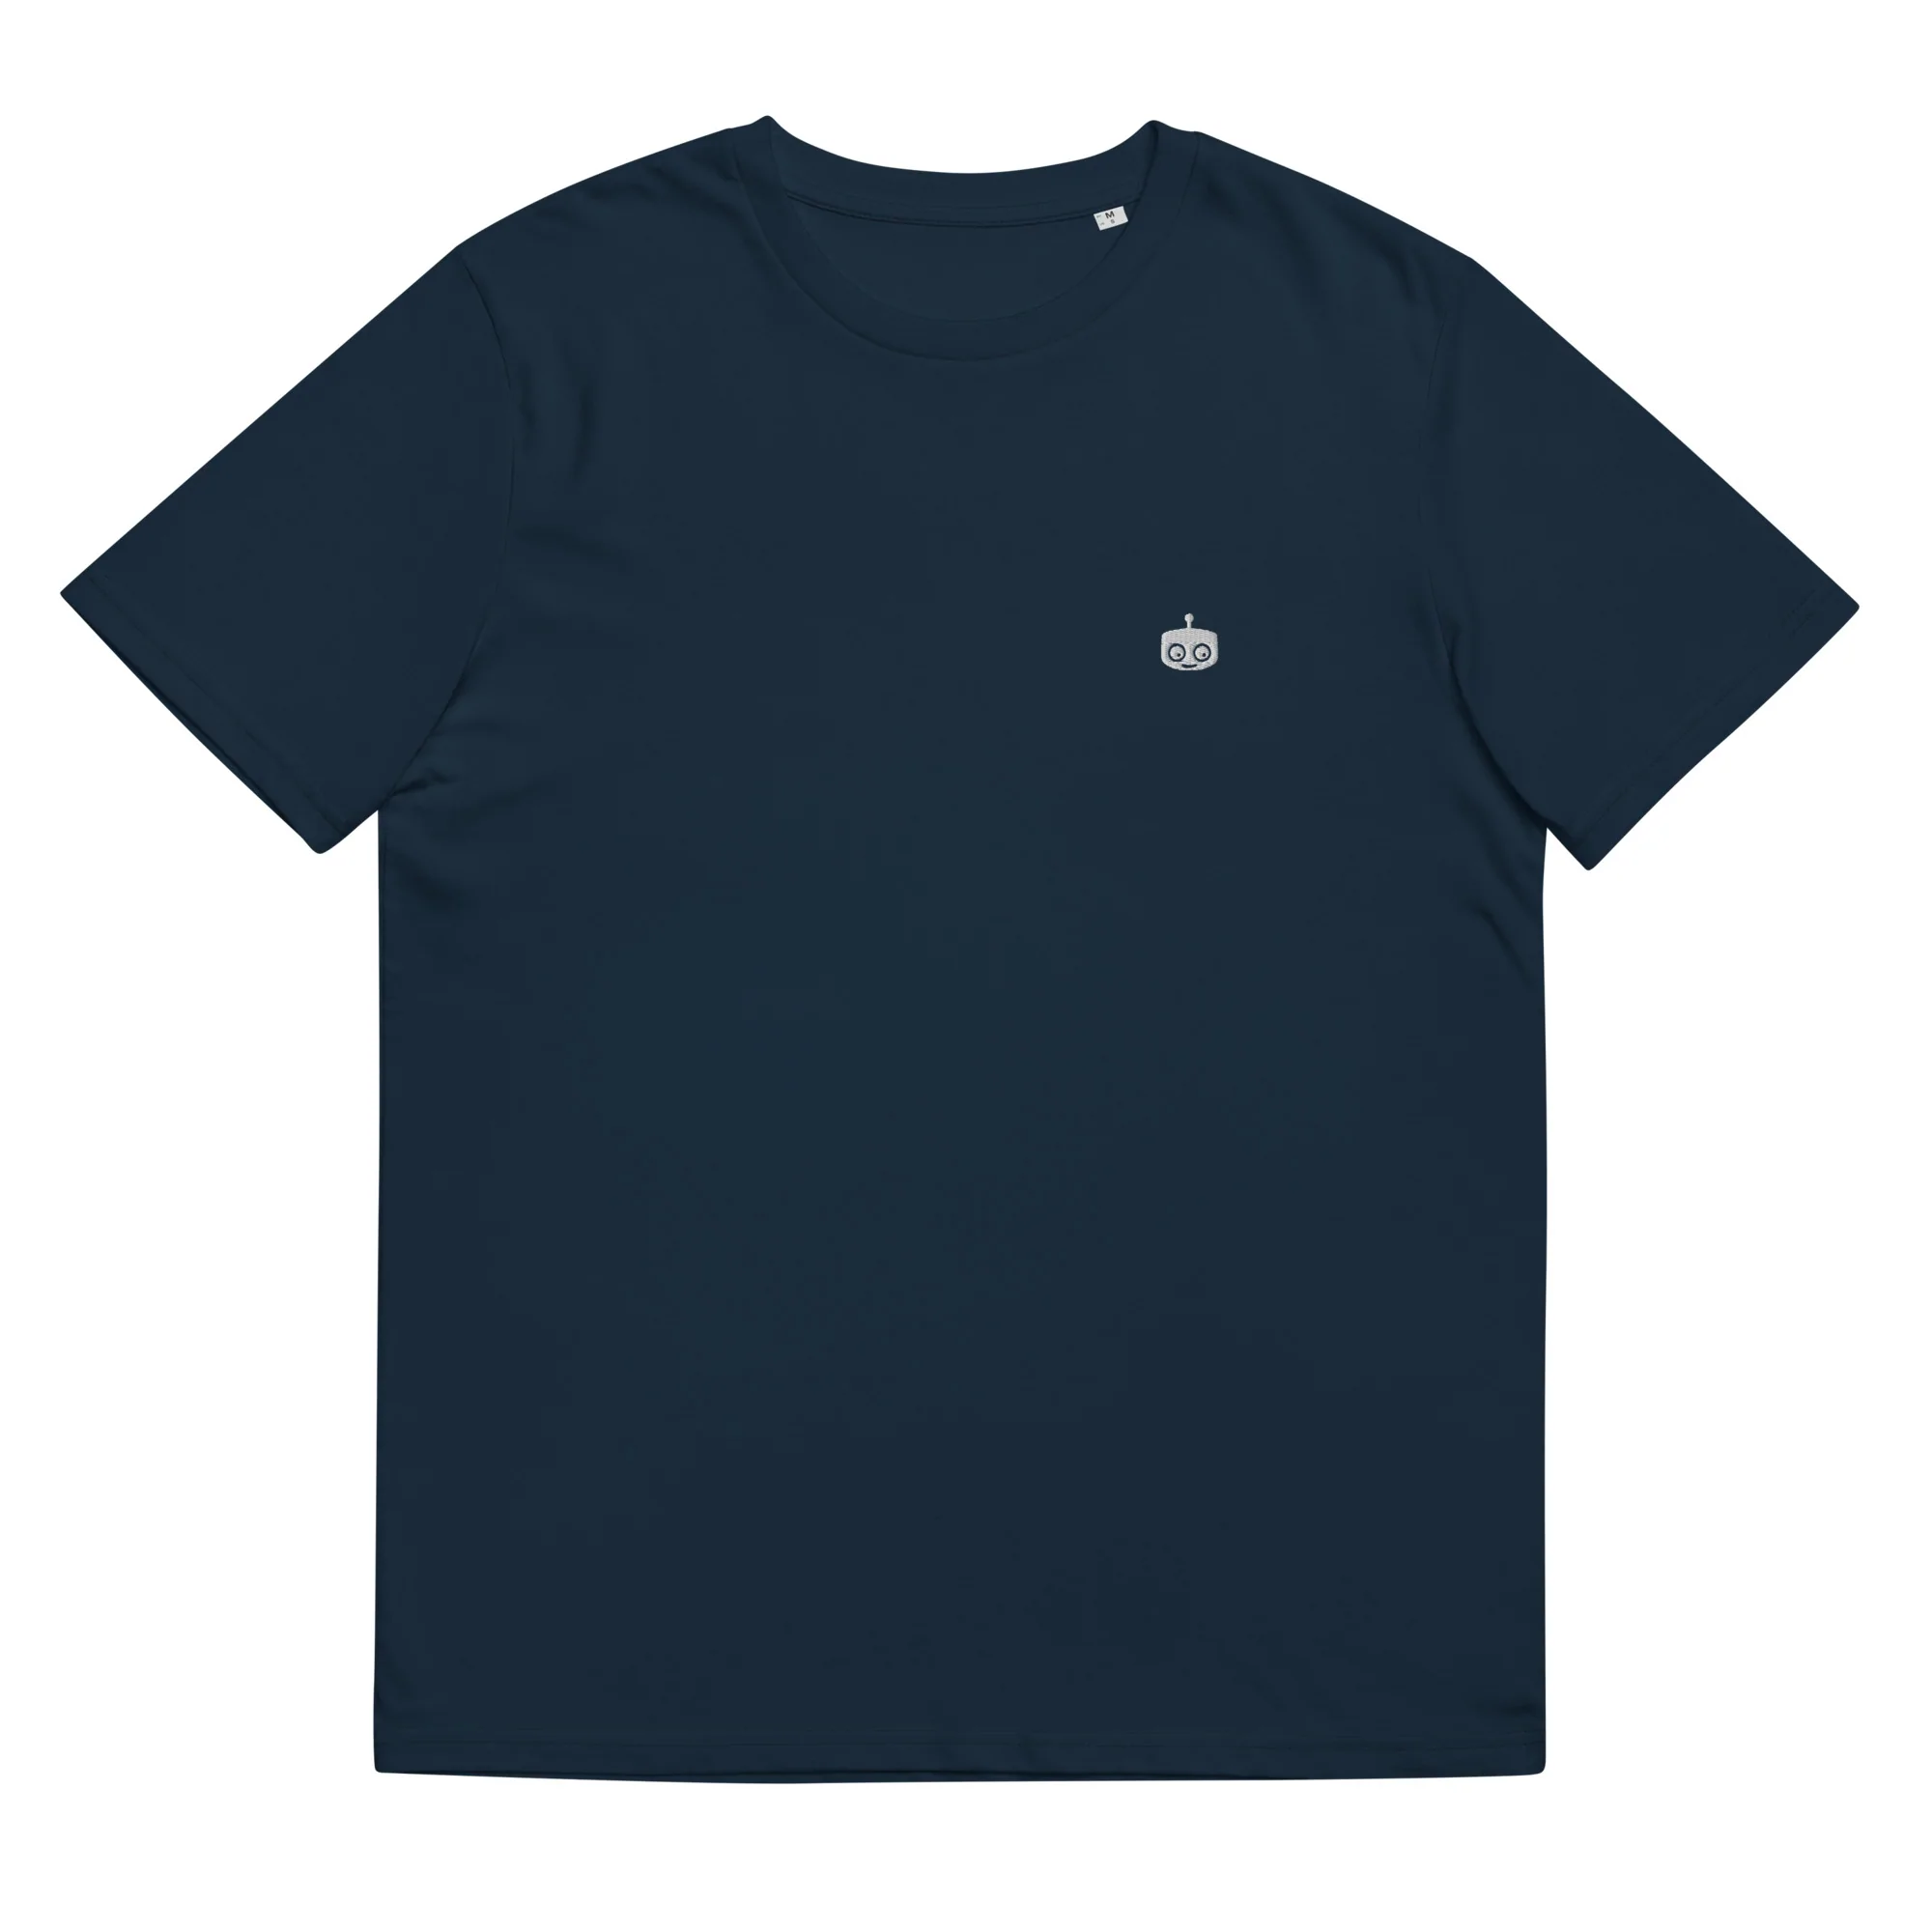 T-Shirt with Botty logo embroidered on